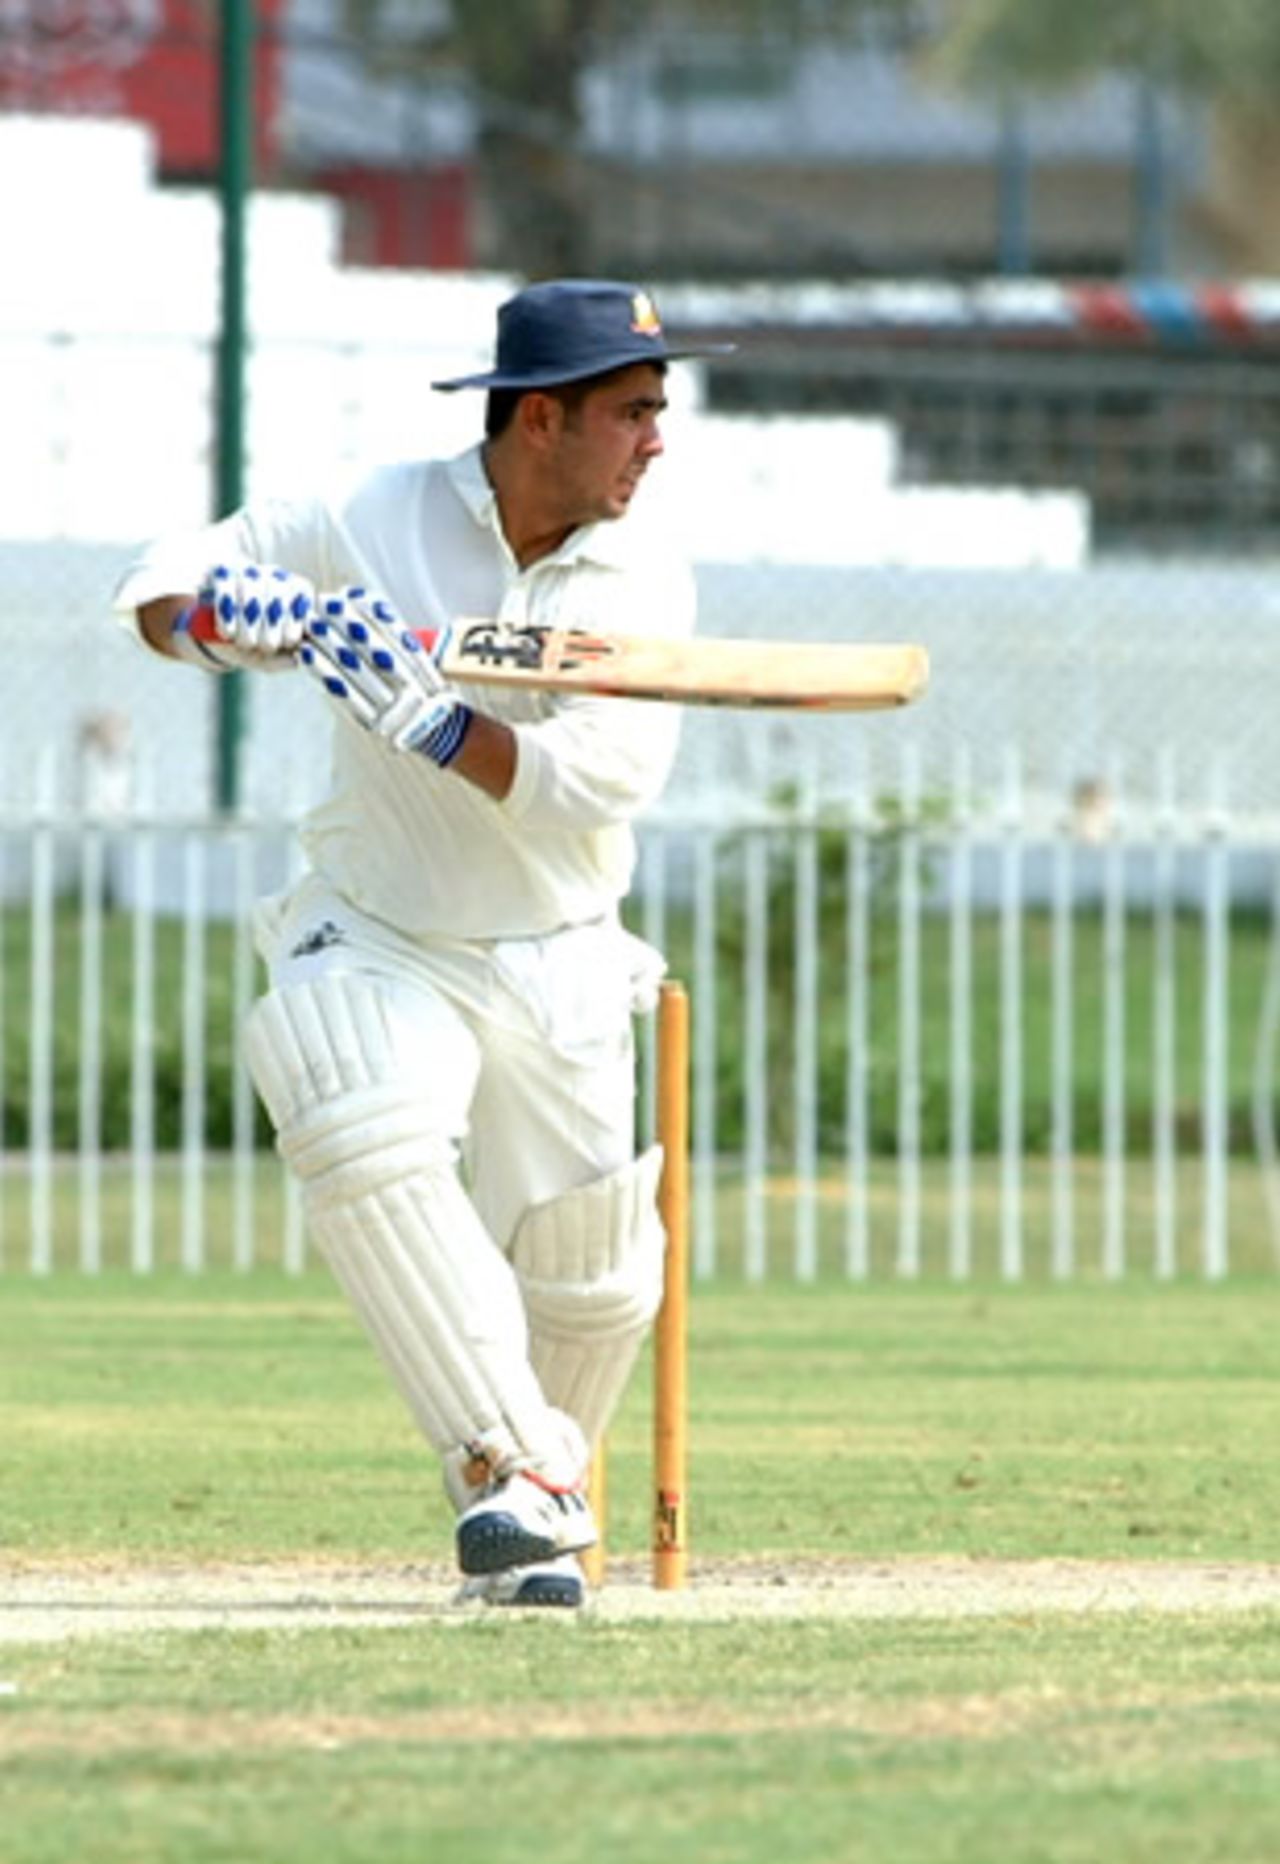 Asim Zubair cuts during his innings of 57 for UAE, Qatar Under-19s v United Arab Emirates Under-19s at United Bank Ltd Sports Complex Karachi, Youth Asia Cup 2003, 16 July 2003.